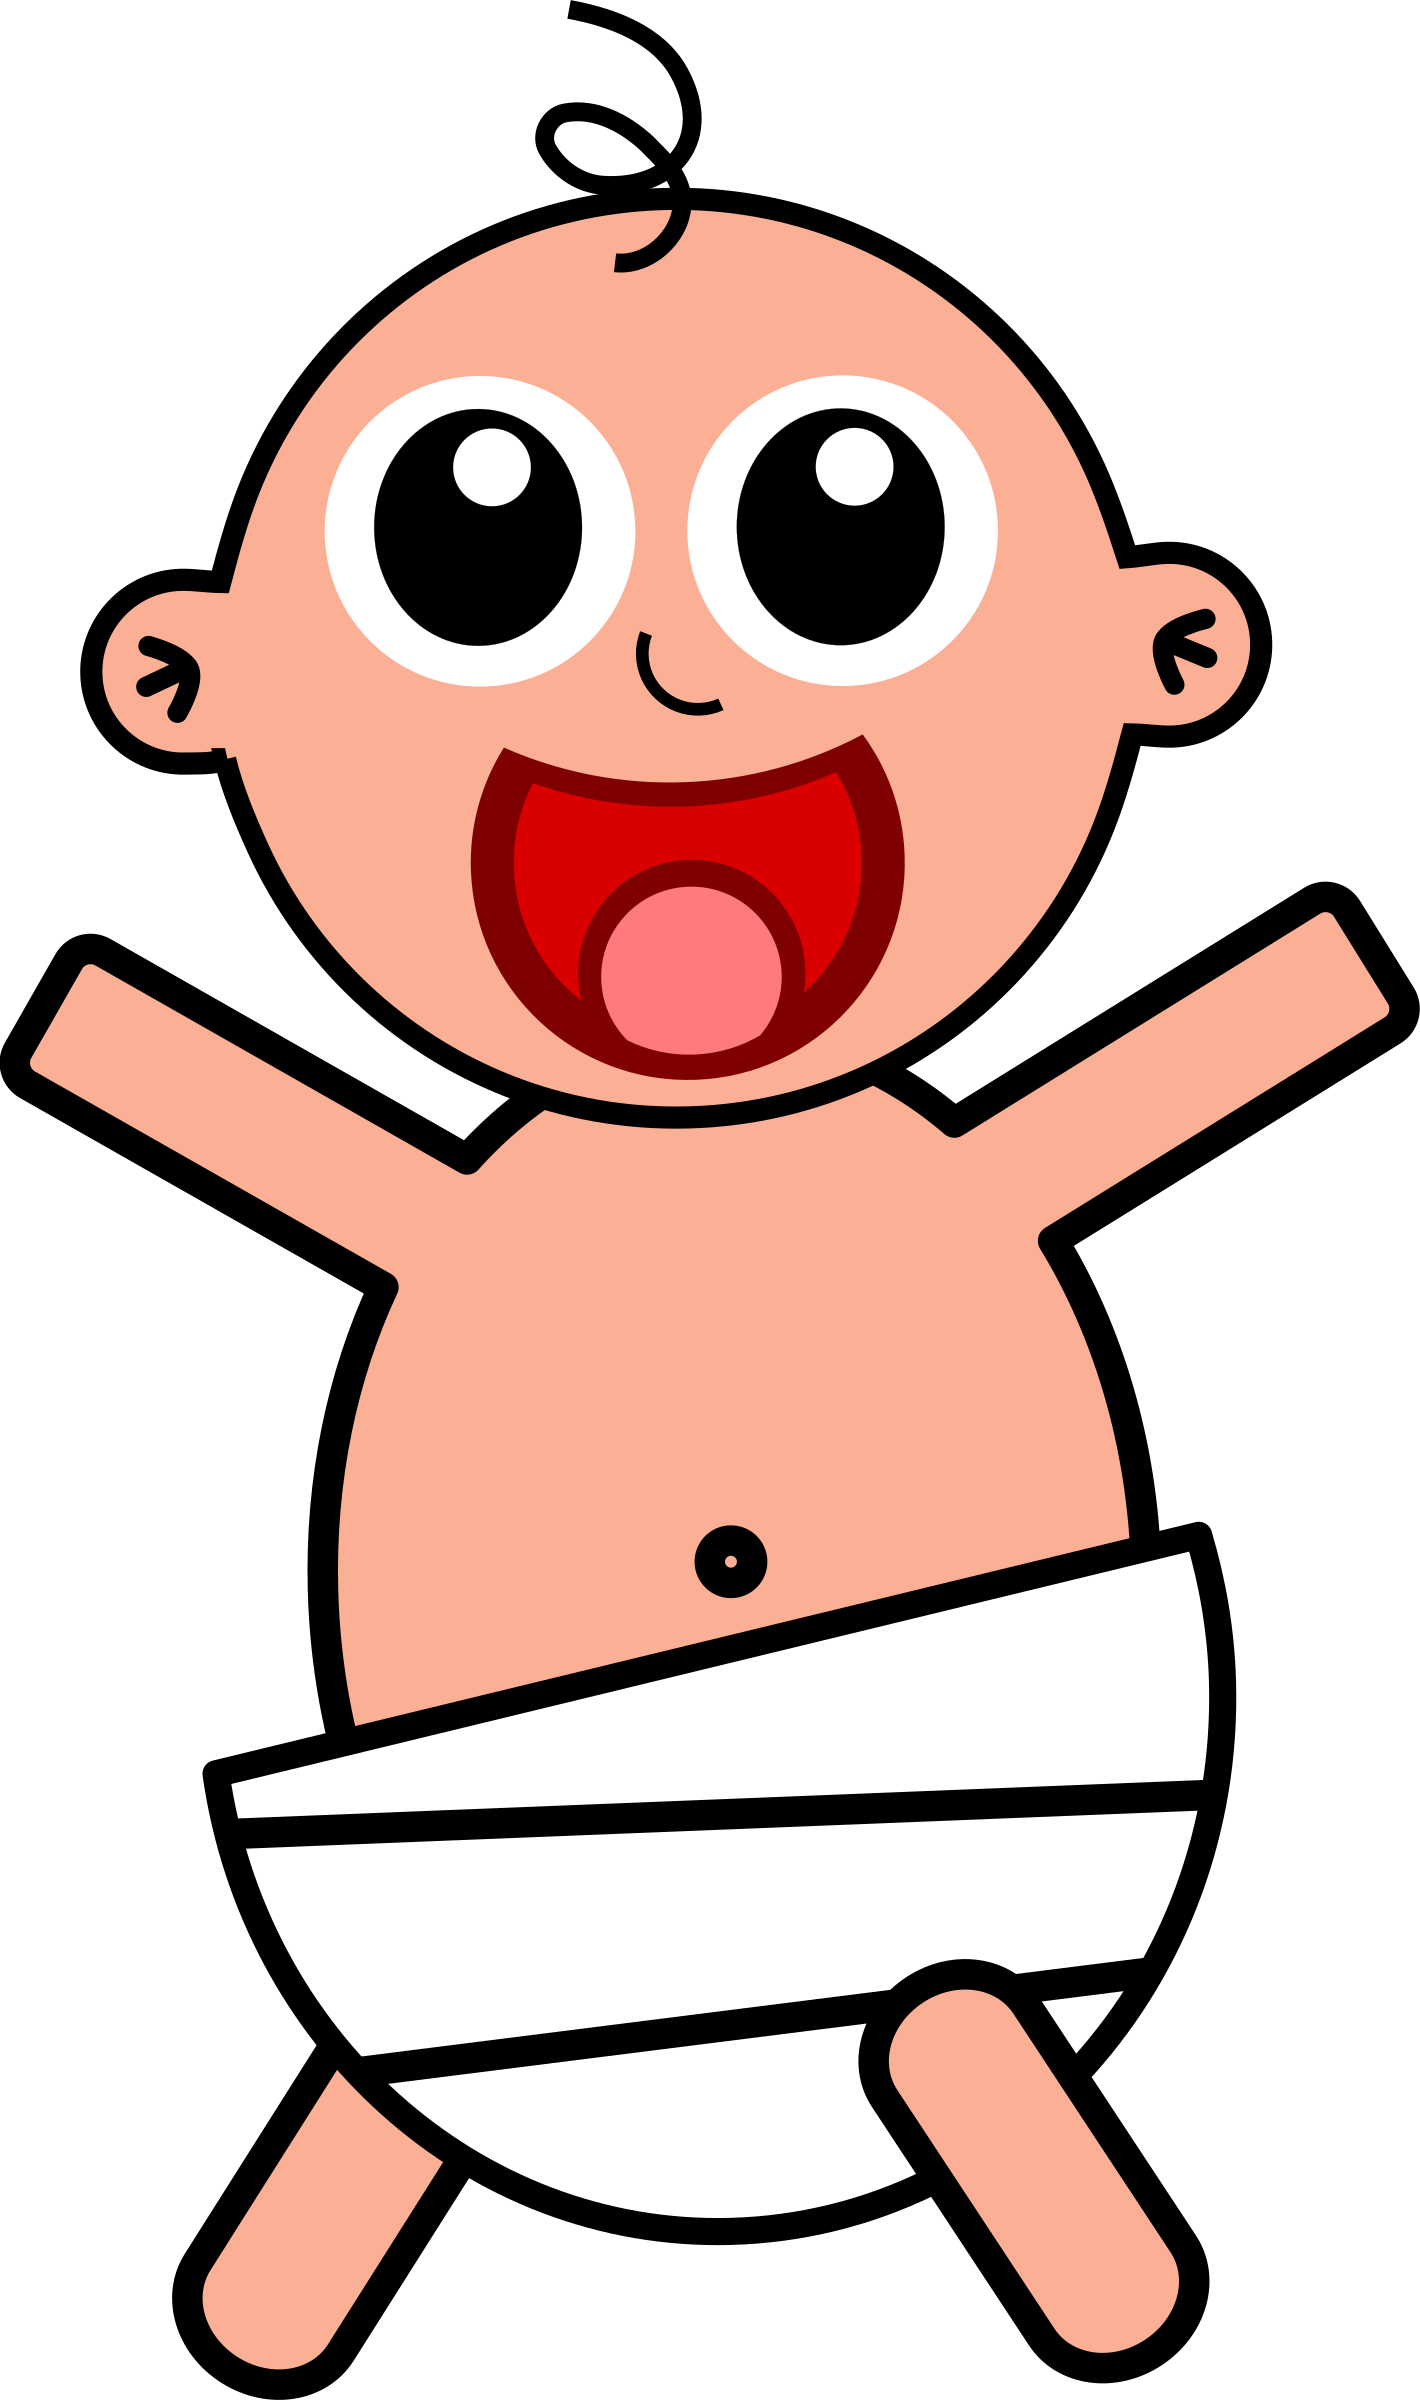 Baby big image png. Announcements clipart cute